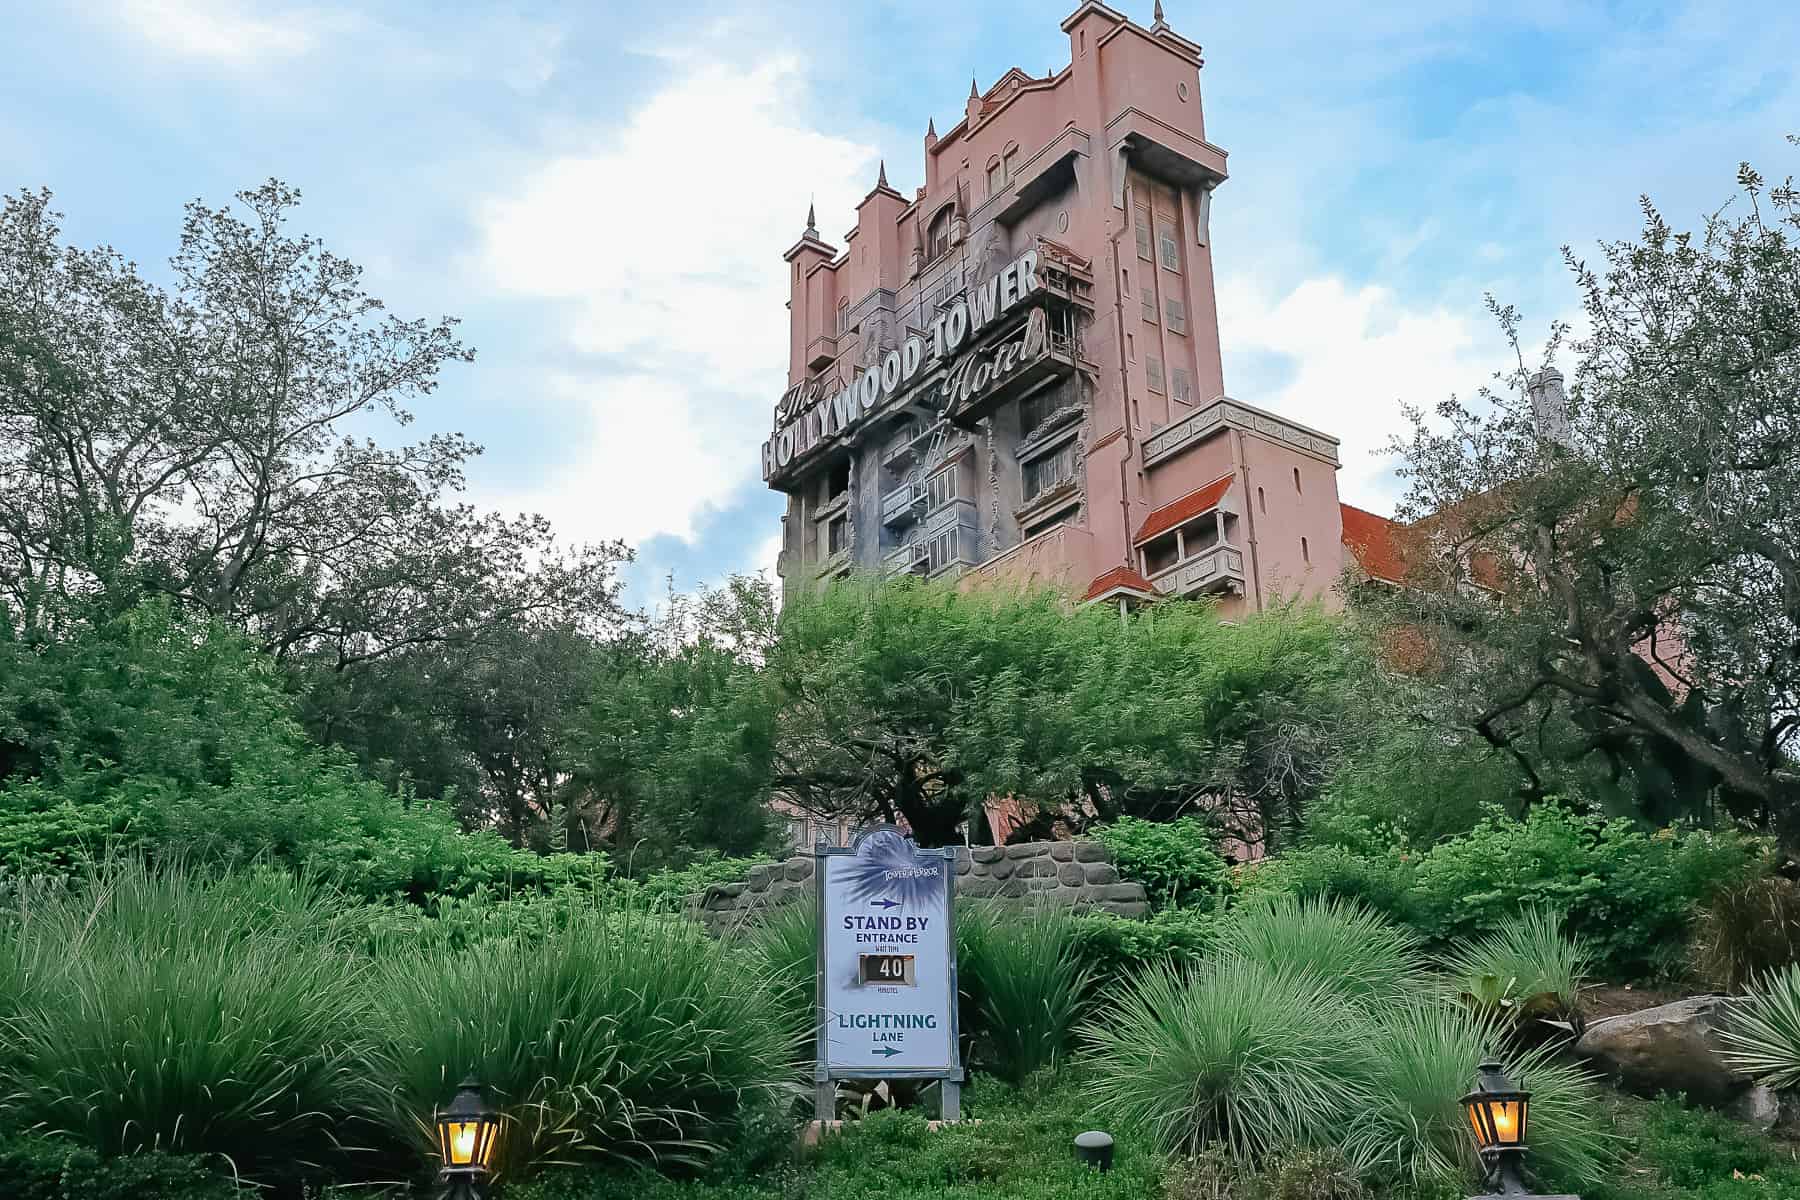 The Twilight Zone Tower Of Terror at Disney’s Hollywood Studios (A Ride Review)